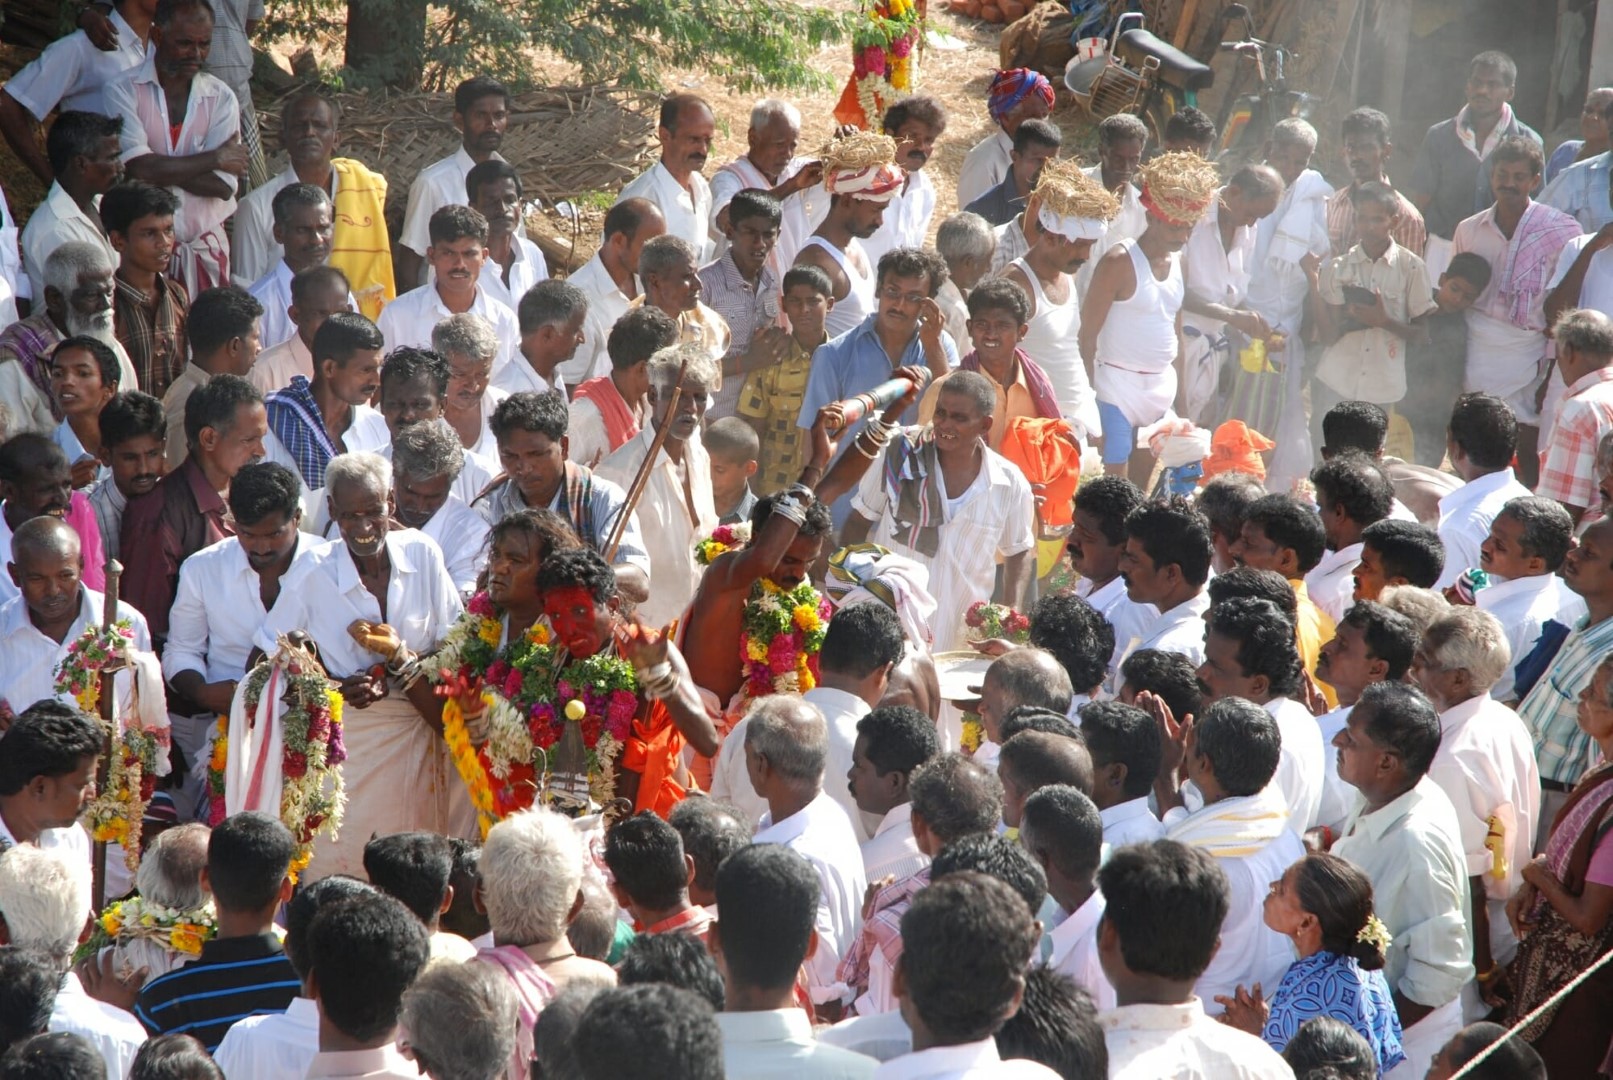 <span style="font-weight:normal;">During this ritual in the potters' quarters, three <i>Sami</i> have taken their place among their devotees to drive away evil coming from outside the village. From left to right, they are Ayyanar, Saniyasi and Karuppu-sami.</span>